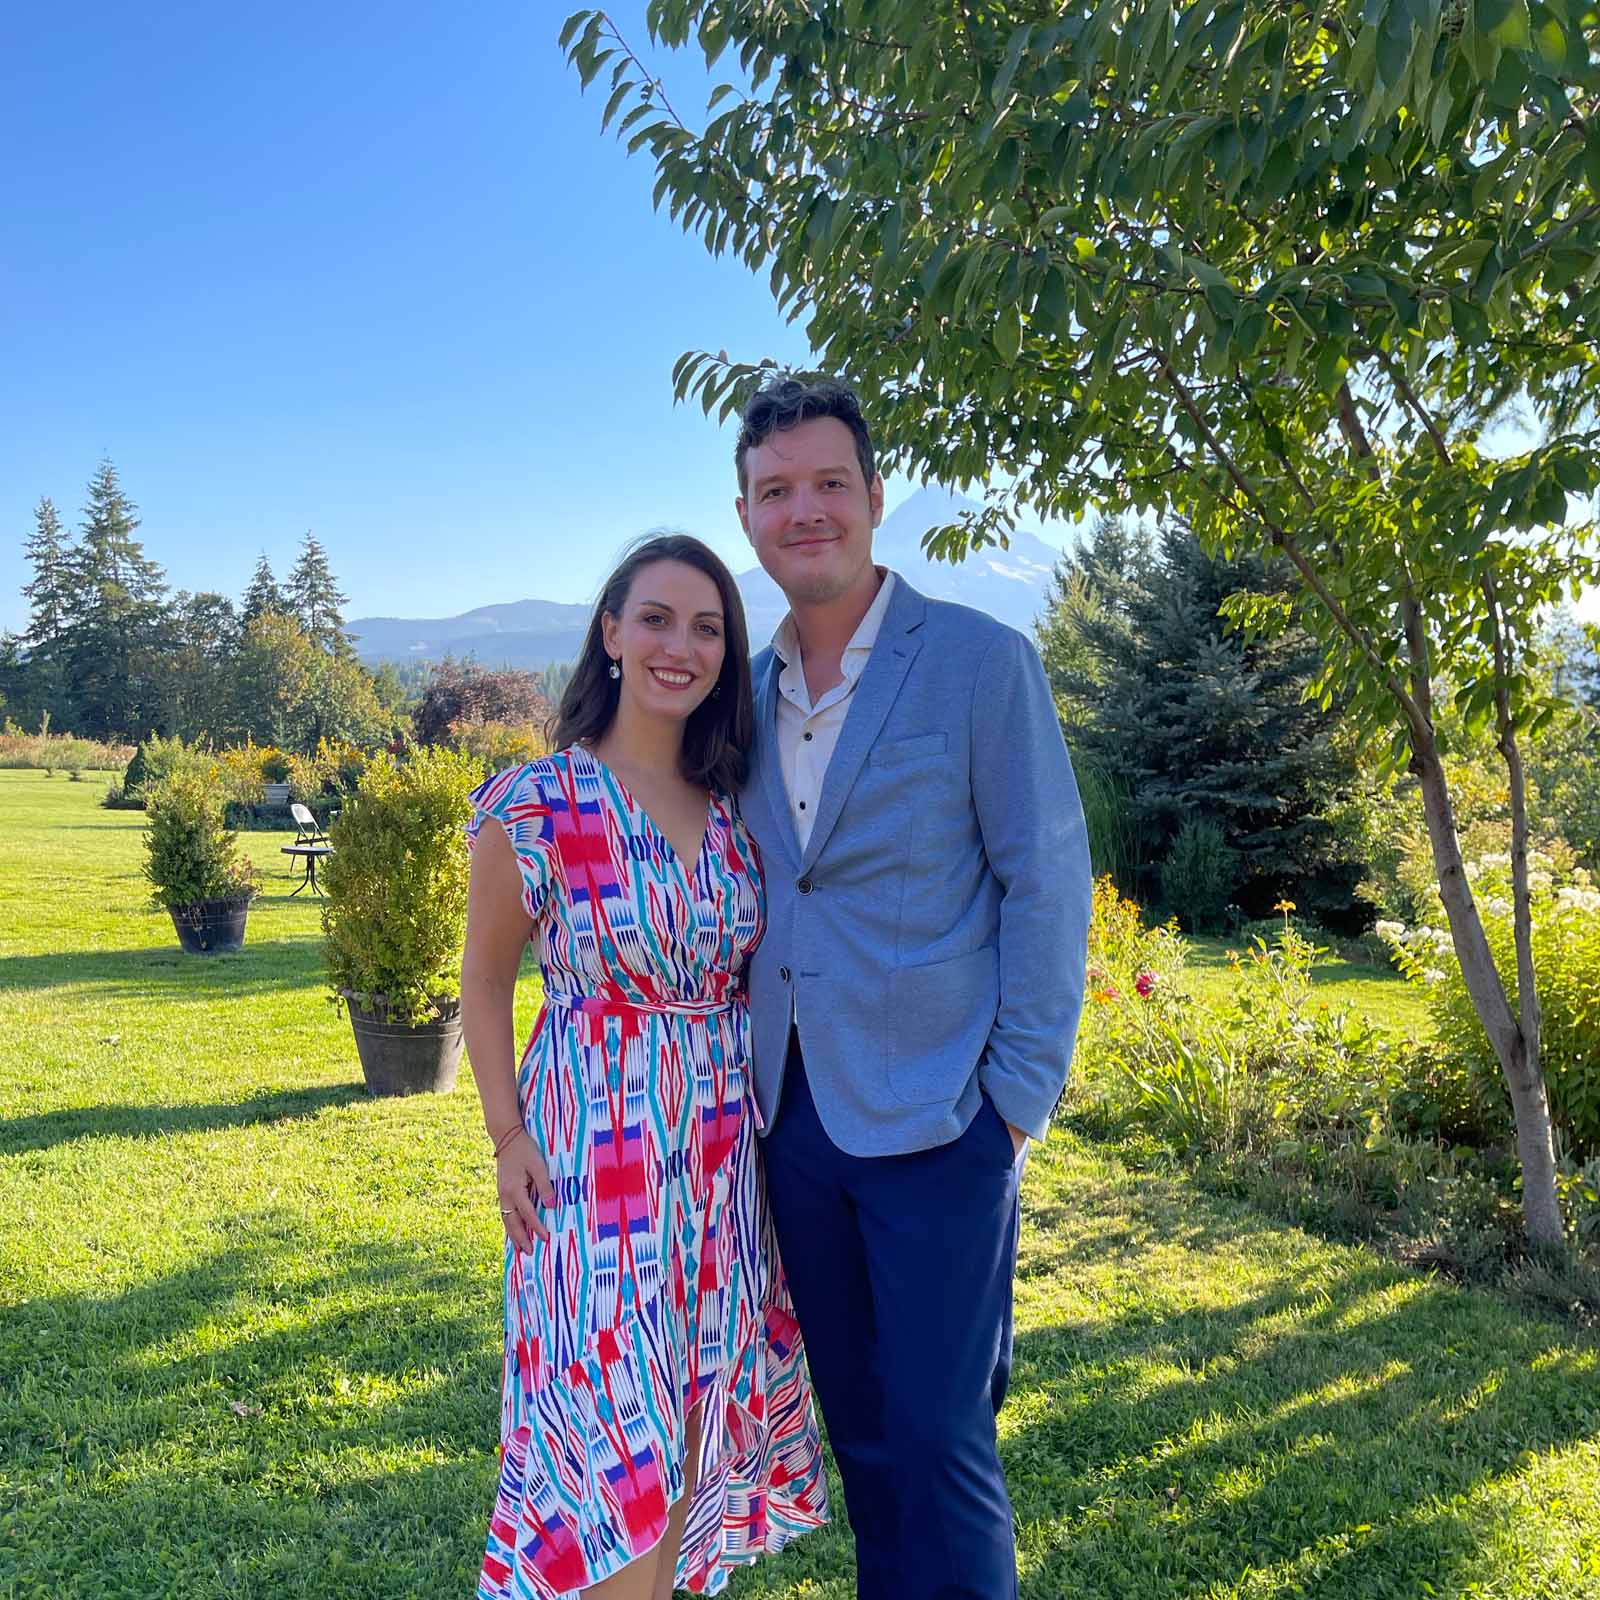 At our first wedding together, for Kate & Zach in Hood River, Oregon